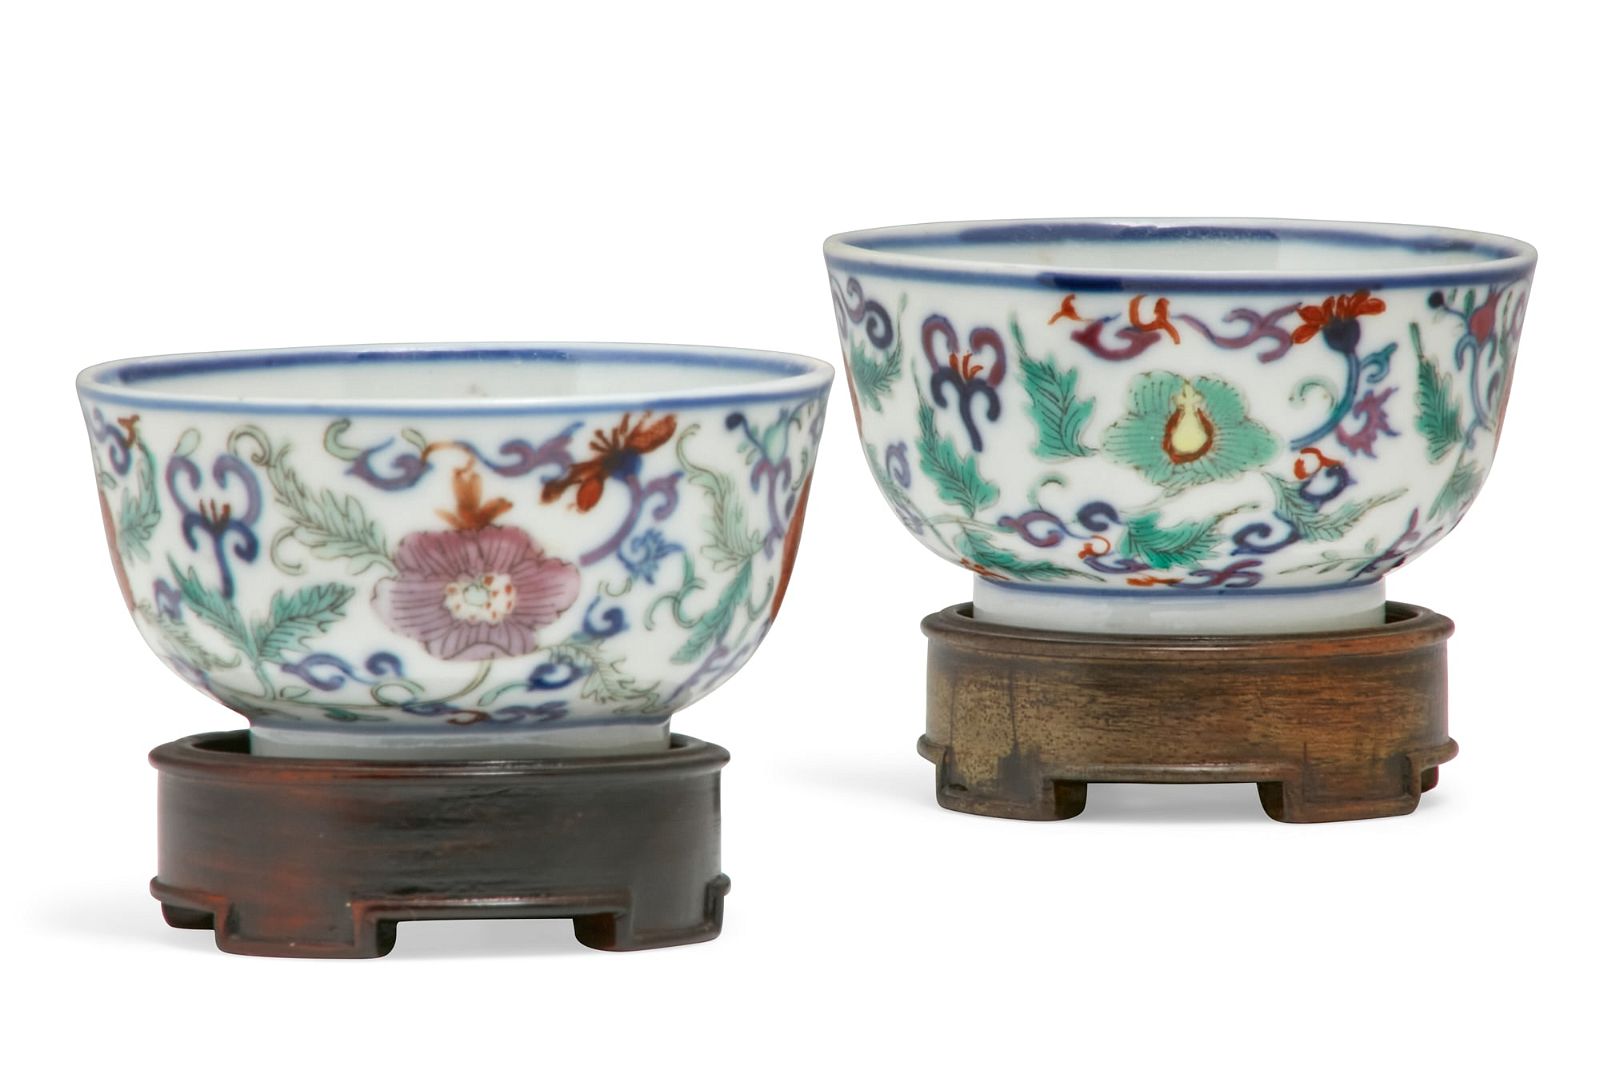 A PAIR OF CHINESE WUCAI PORCELAIN